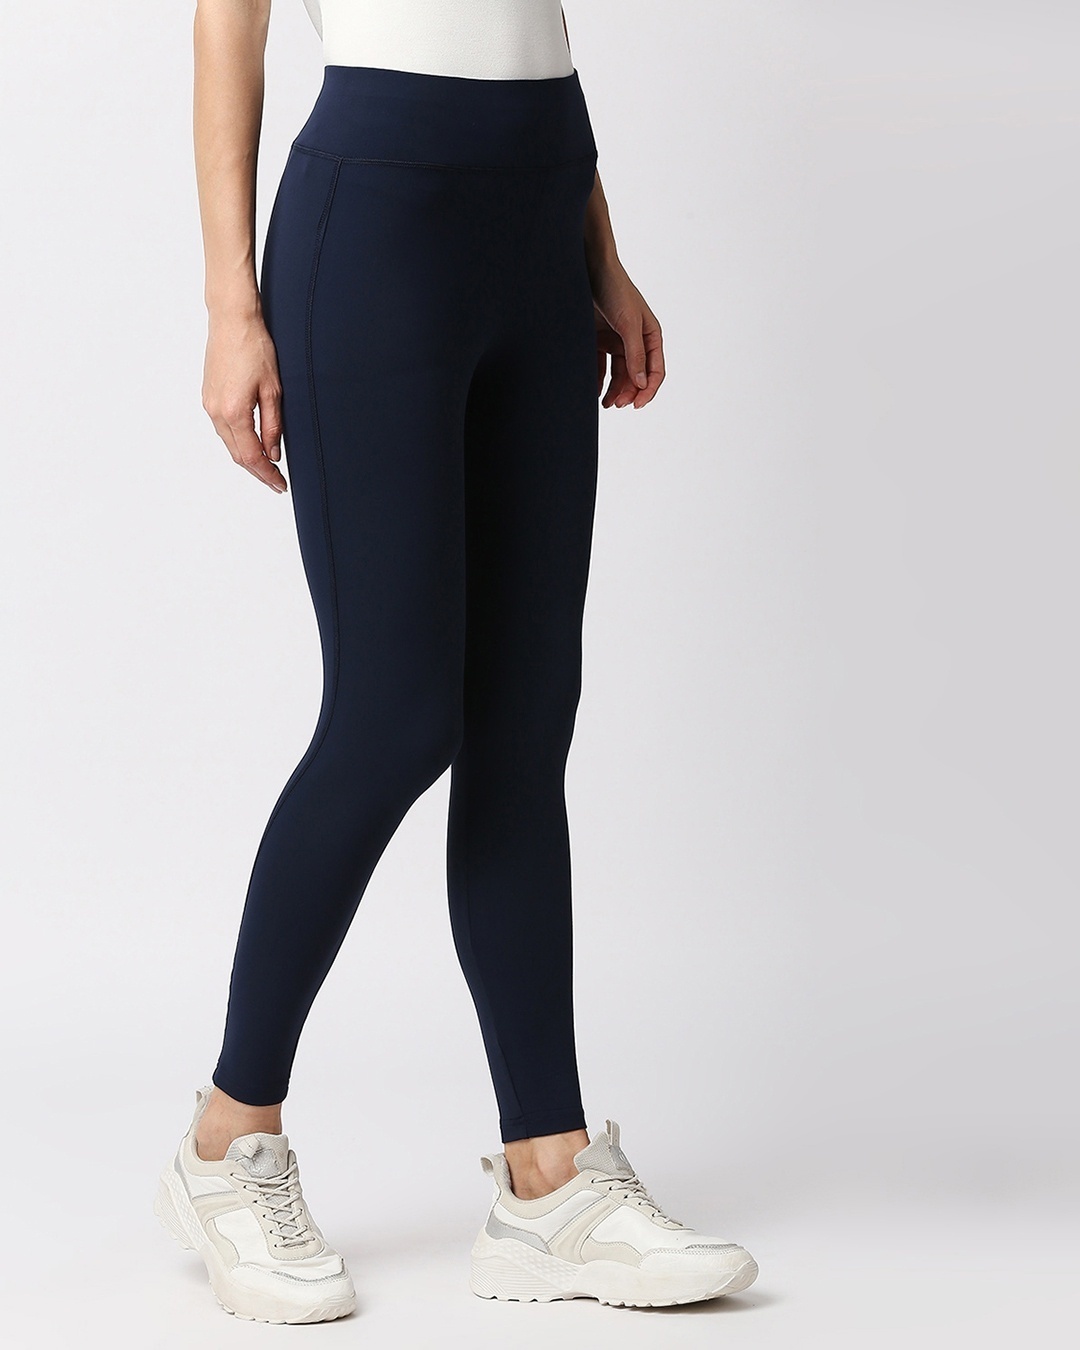 Shop Women's Blue Casual Tights-Back